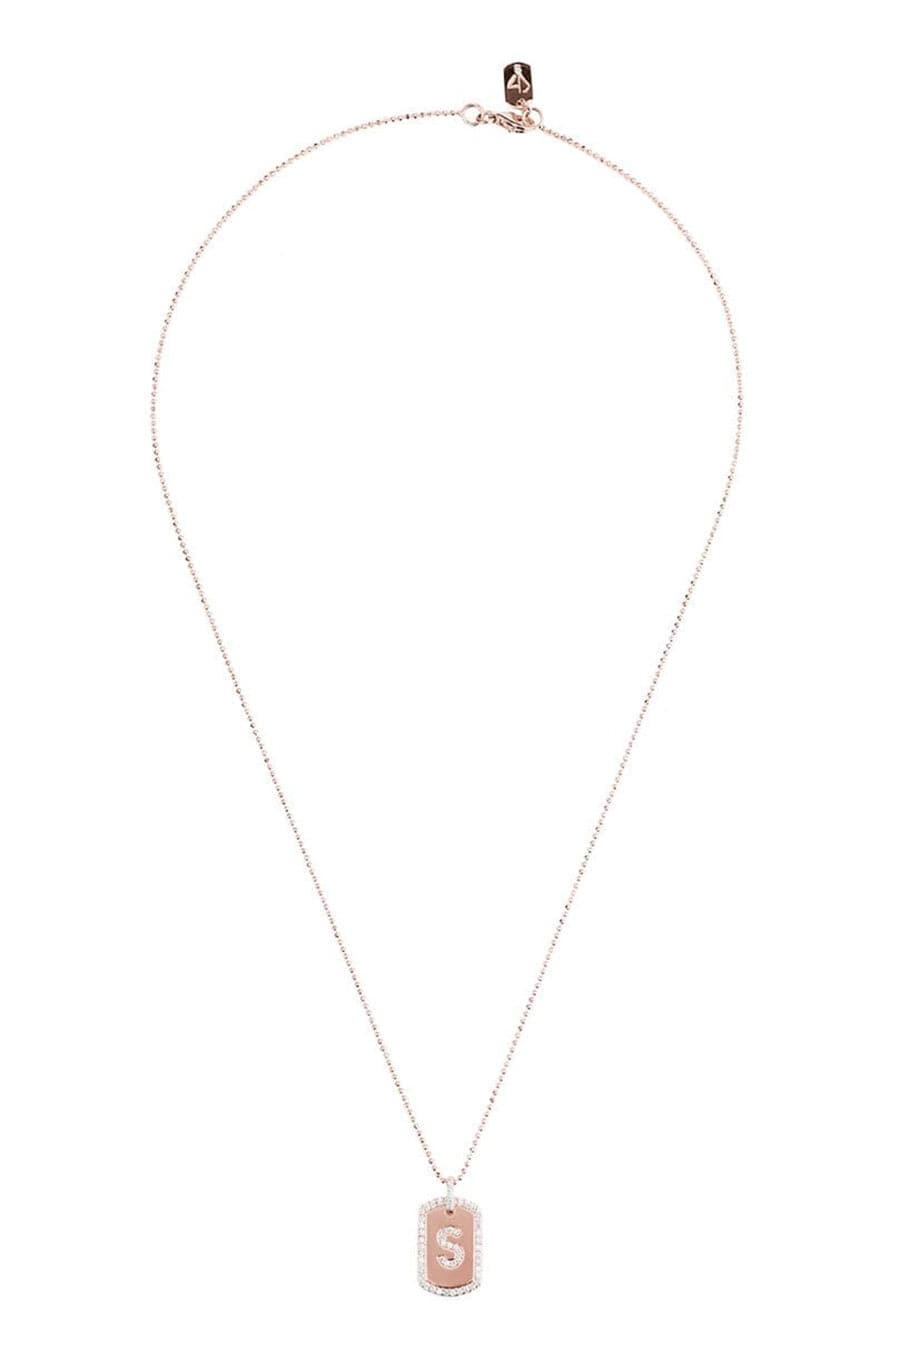 CARBON & HYDE-Initial Dogtag Necklace - Rose Gold-ROSE GOLD